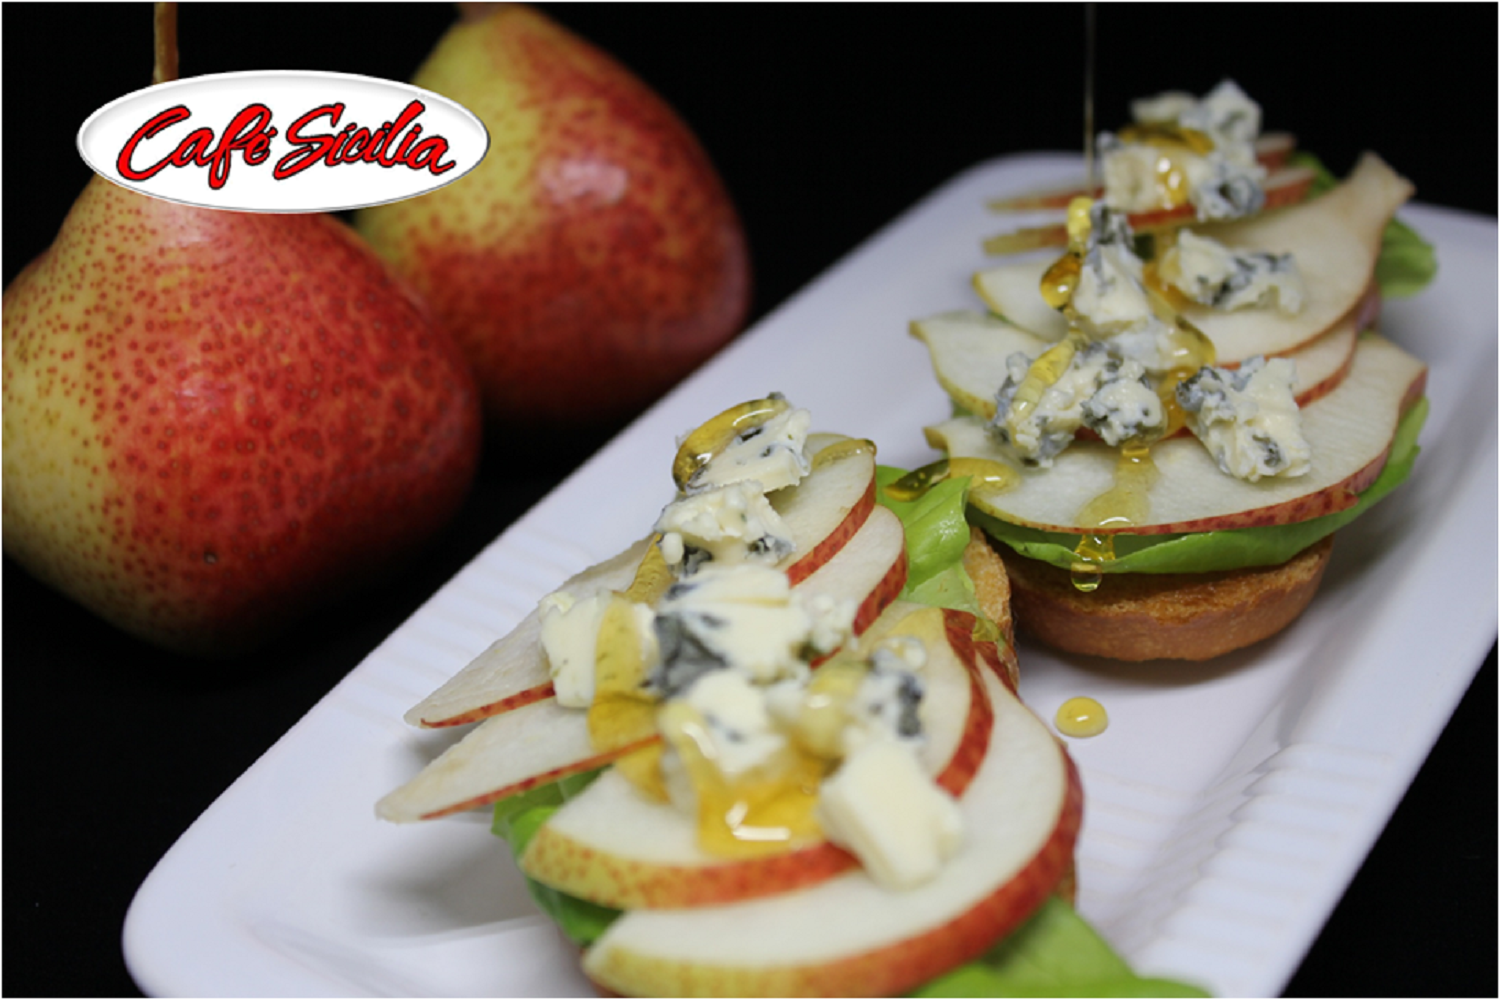 Crostini Topped with Pears and Gorgonzola Cheese